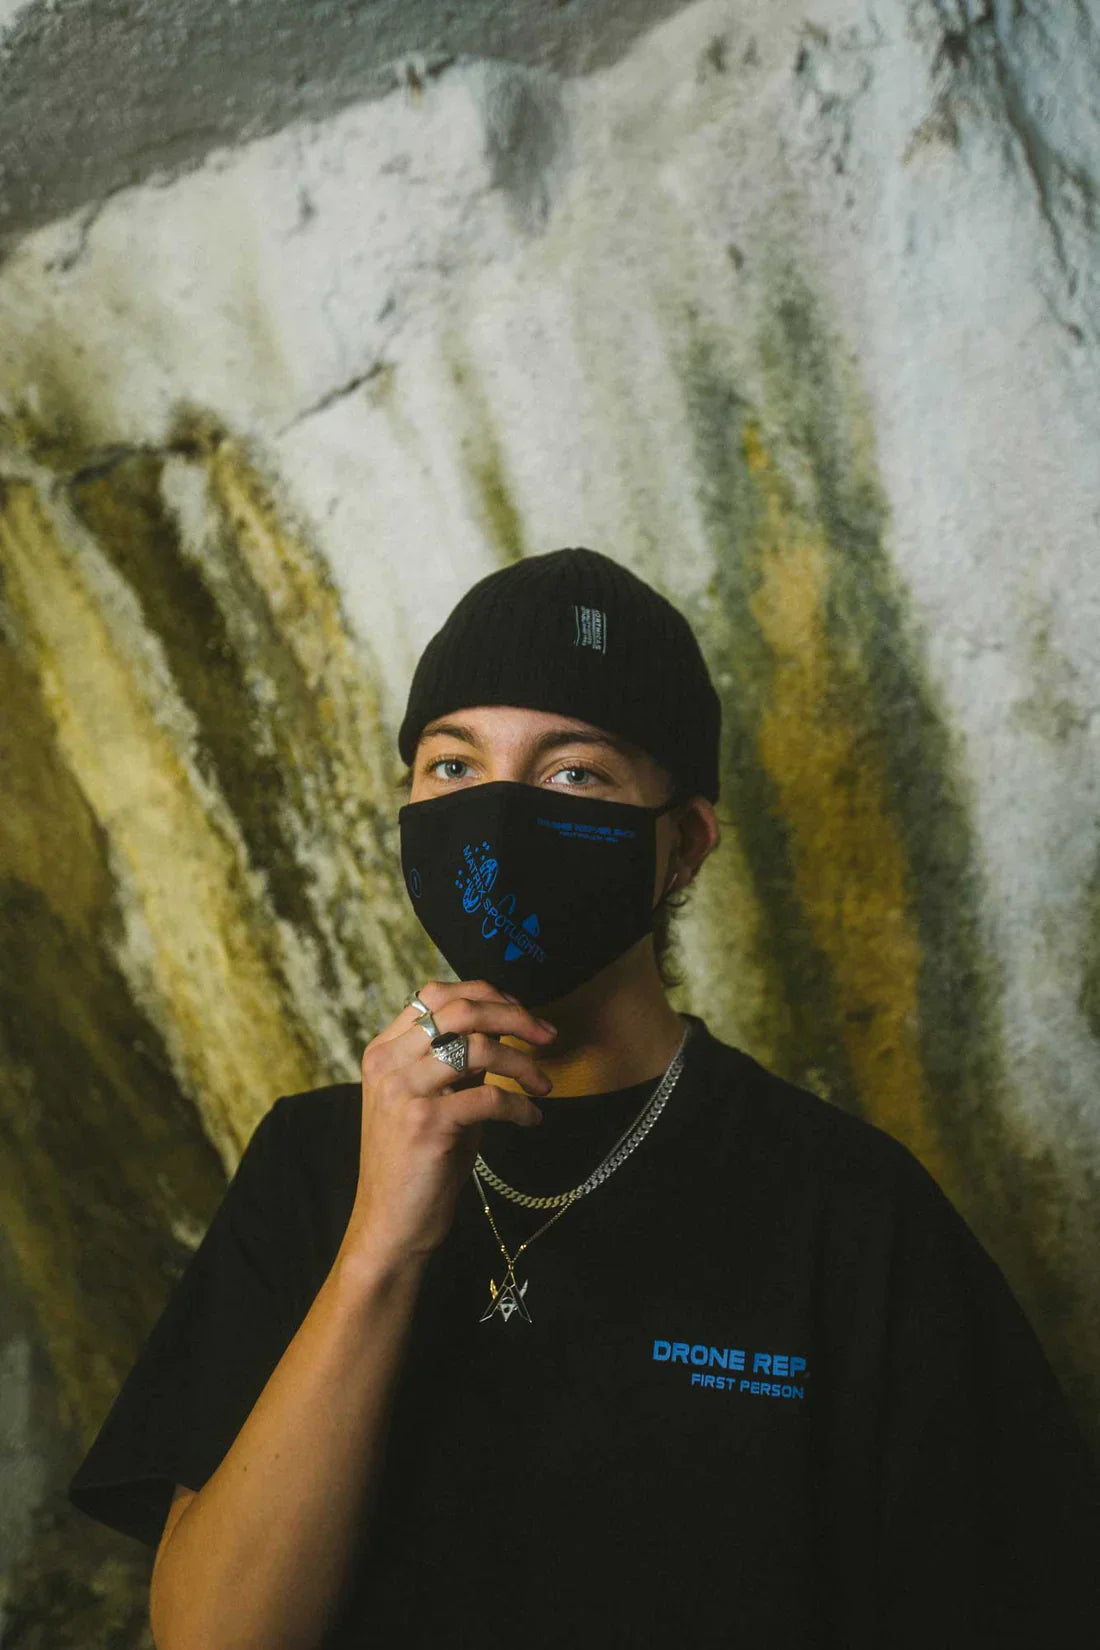 Individual with a black beanie and wearing the Drone Repair Shop Mask in black with blue graphics, paired with a matching black T-shirt, set against a textured wall backdrop.